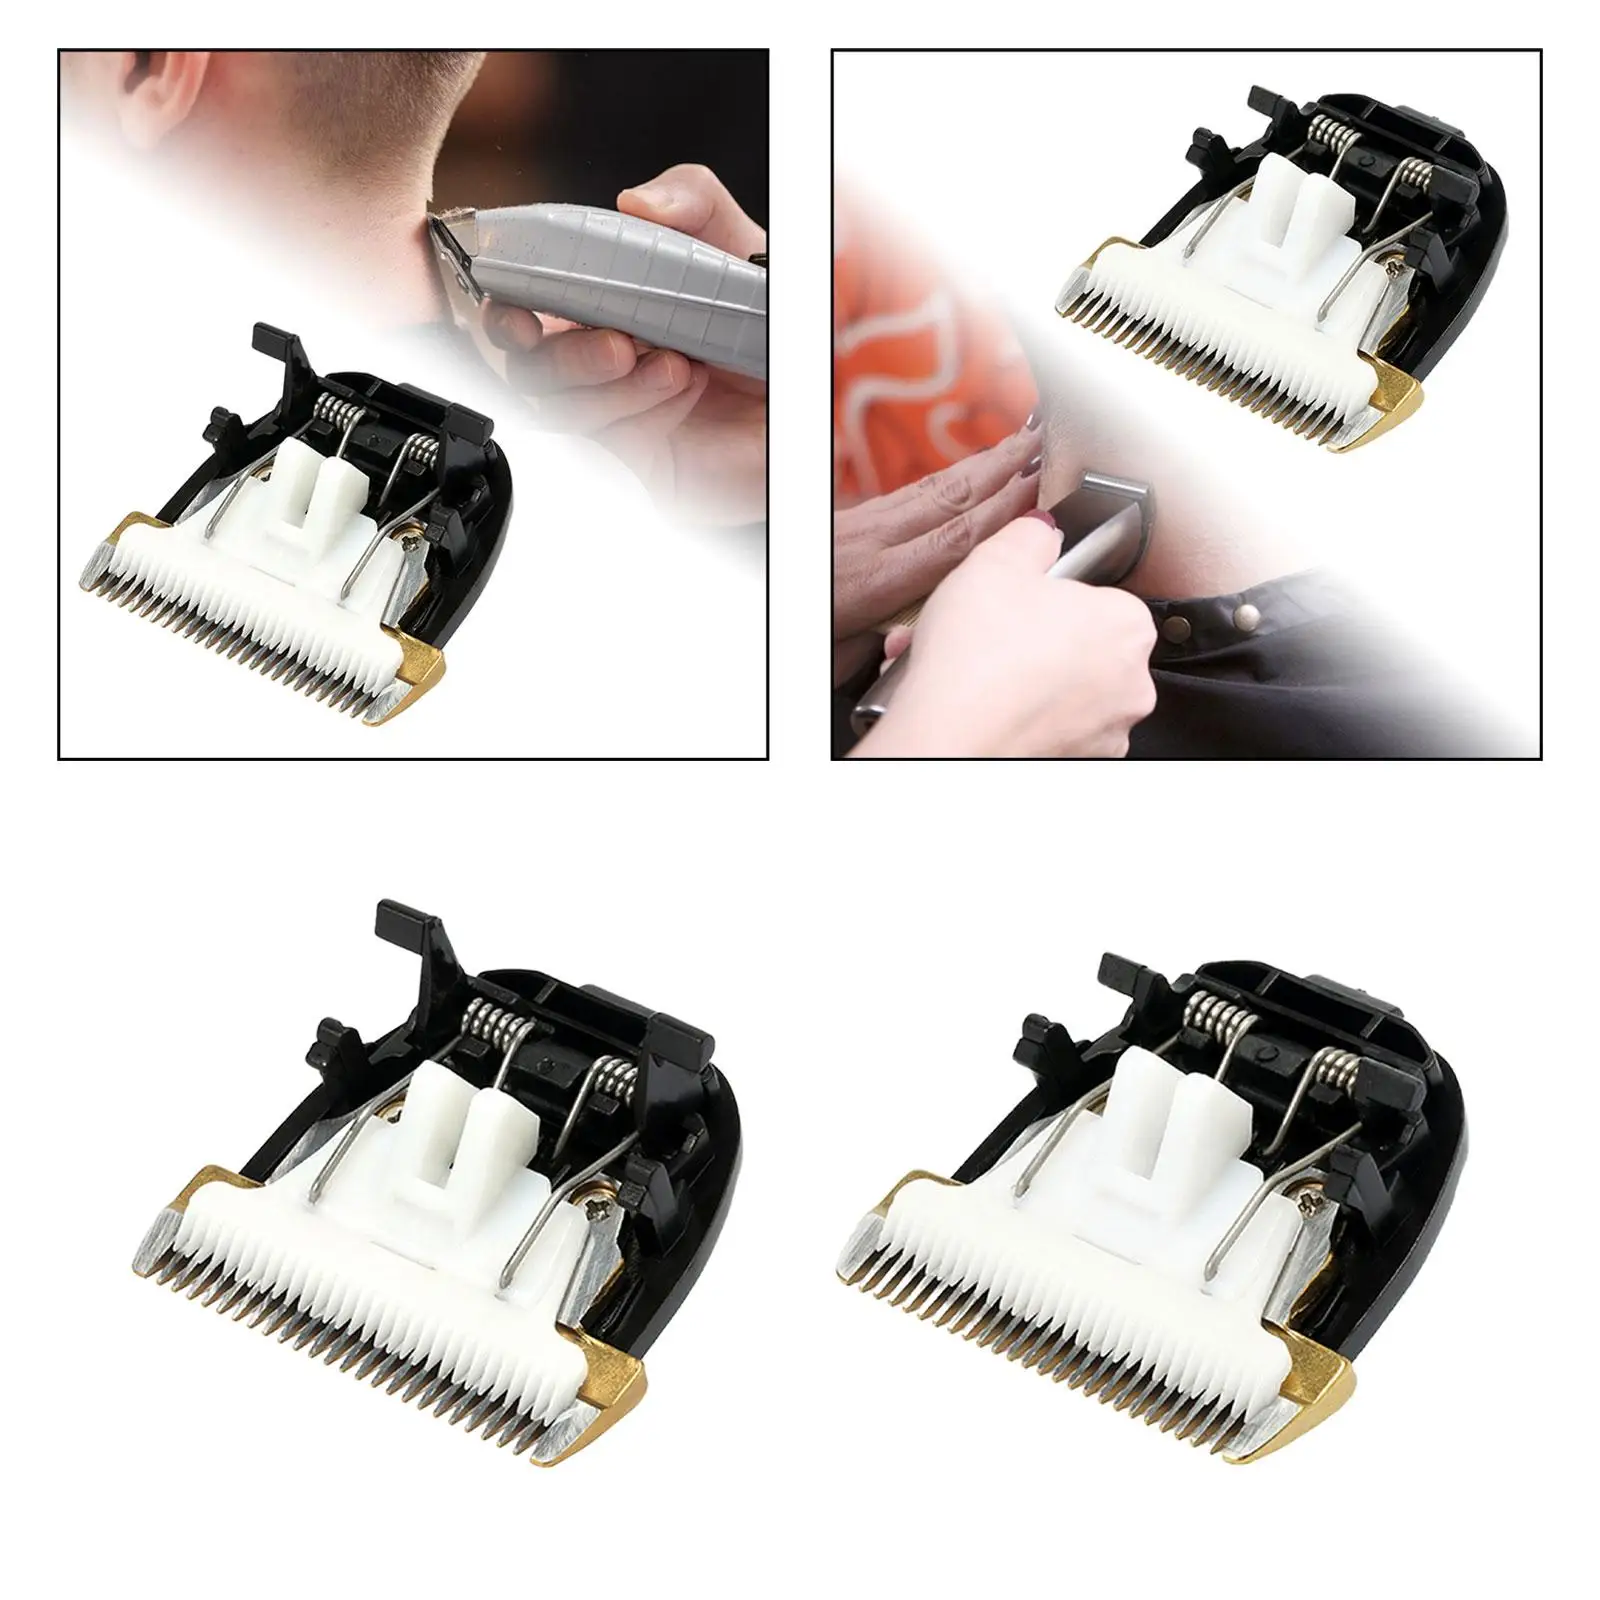 Blade Clipper Head Hair Trimmer Blade Cutter Men Electric Shaver Head Hair Grooming Tool Replace Professional for Barbershop